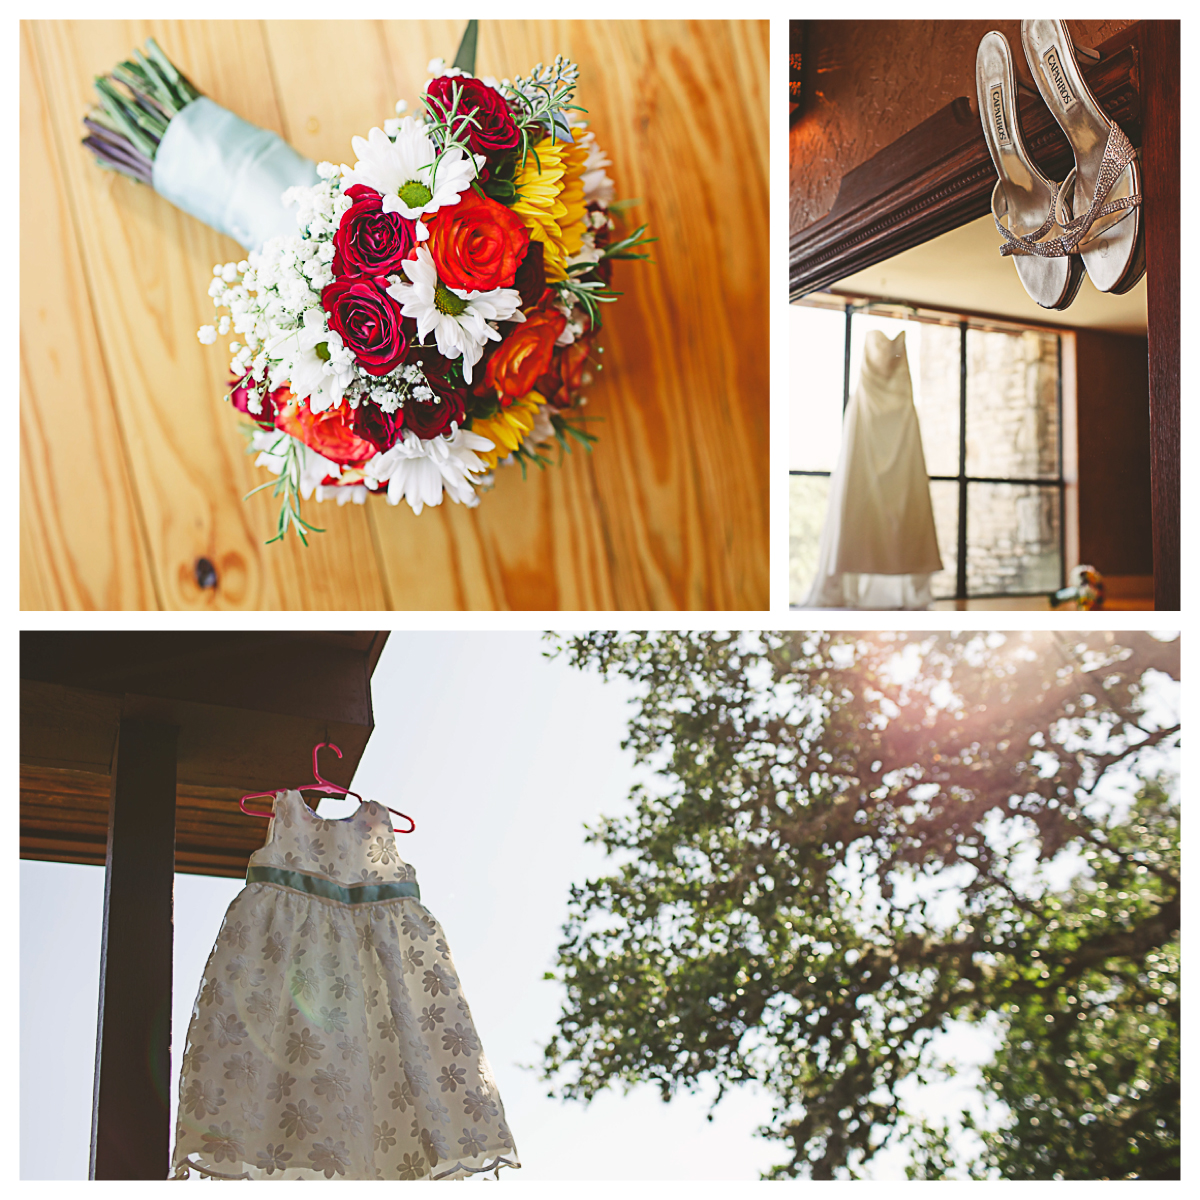 dripping springs memory lane event center wedding photography